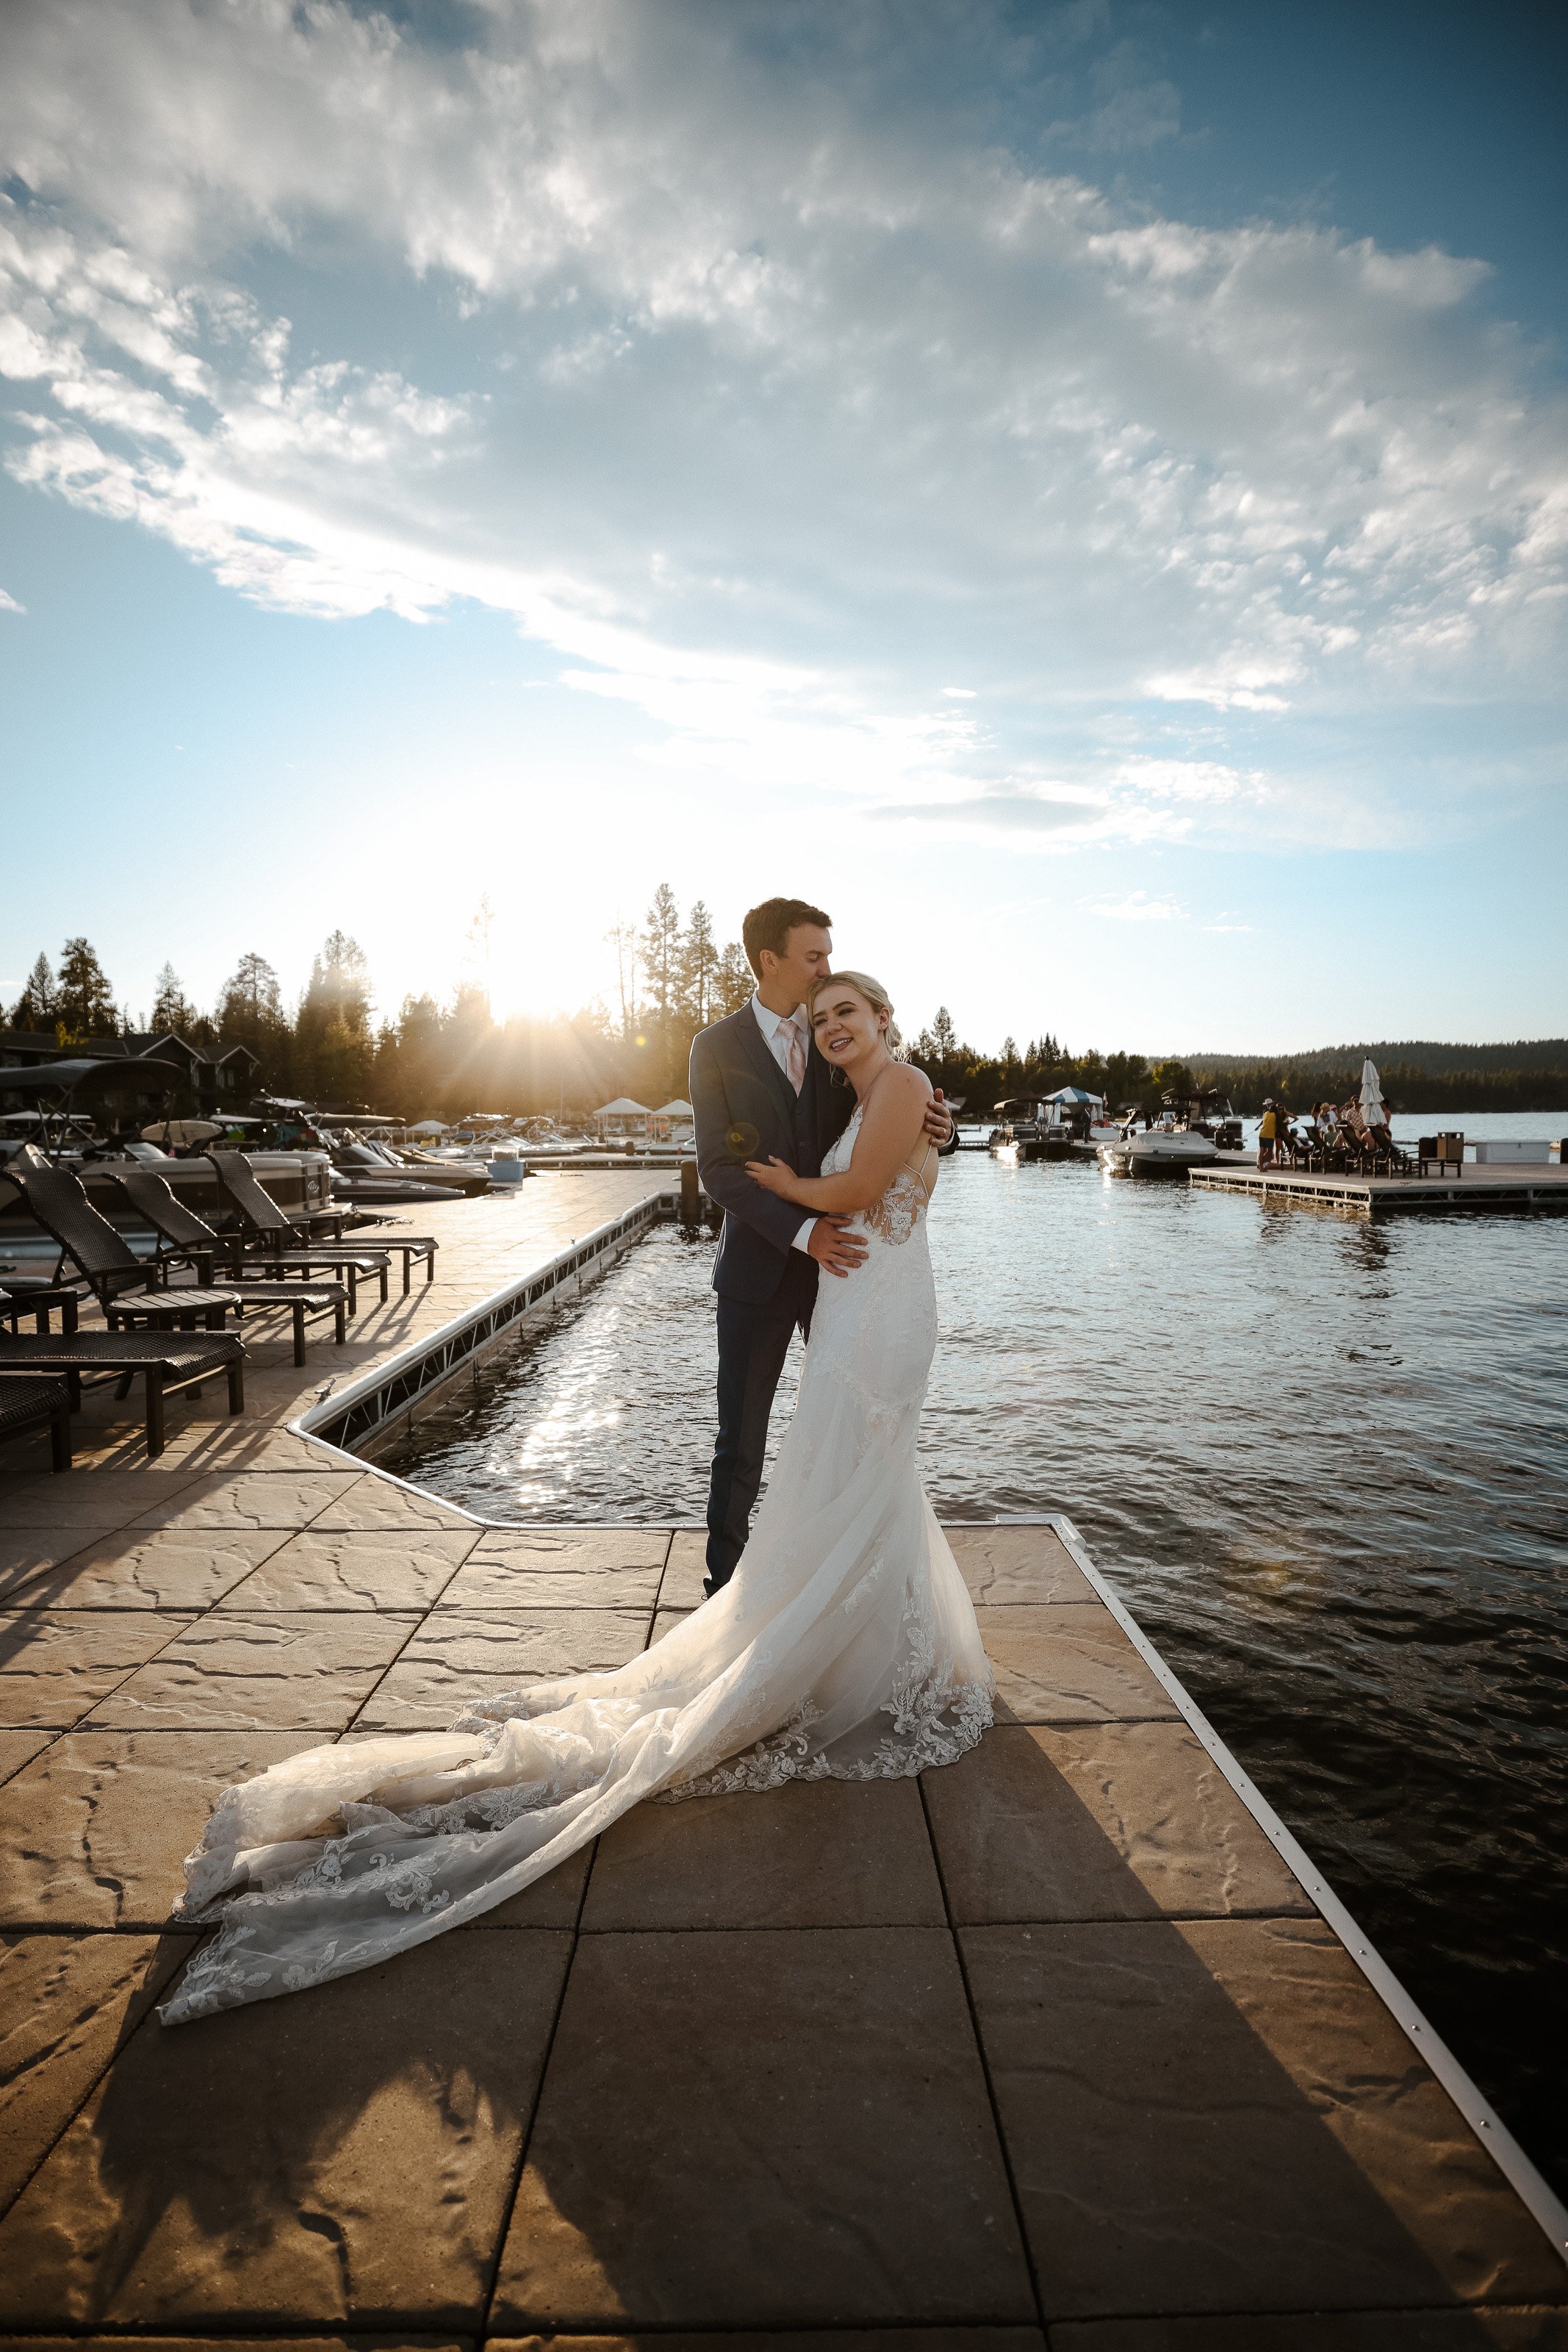 Sunset Bride and Groom on Dock